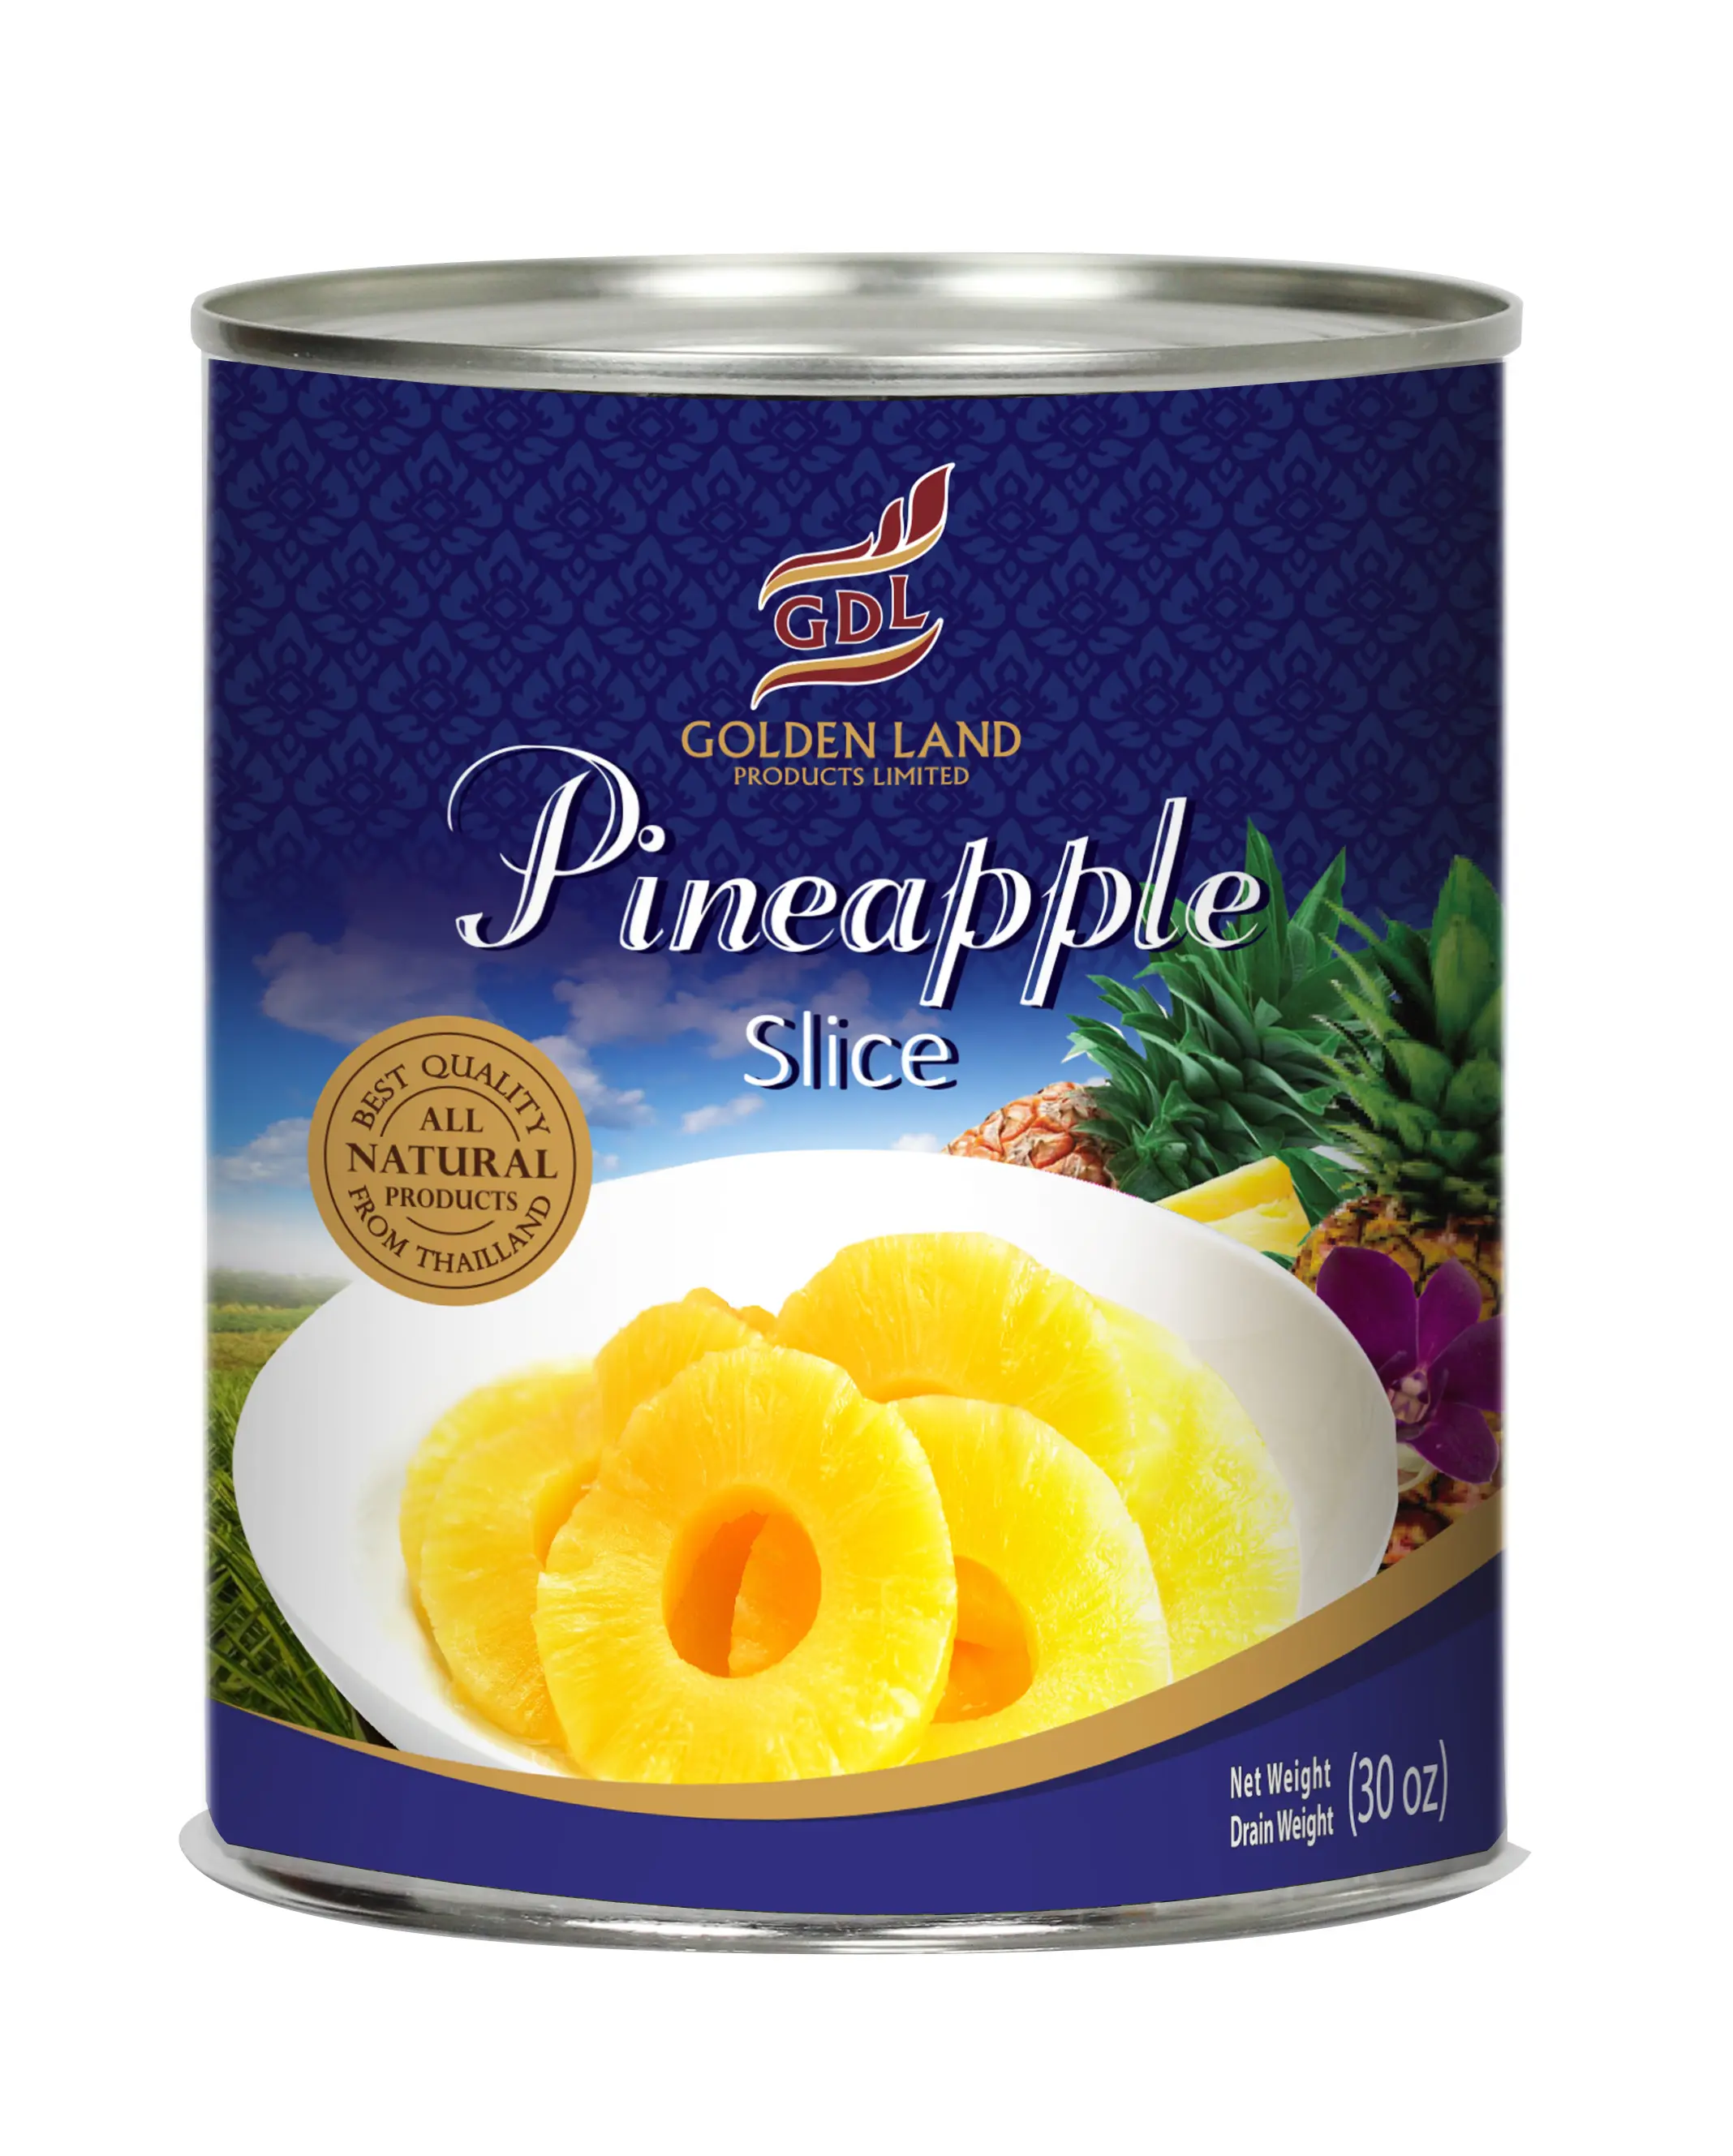 Canned sliced pineapple in light syrup or in heavy syrup best price competitive price 2021